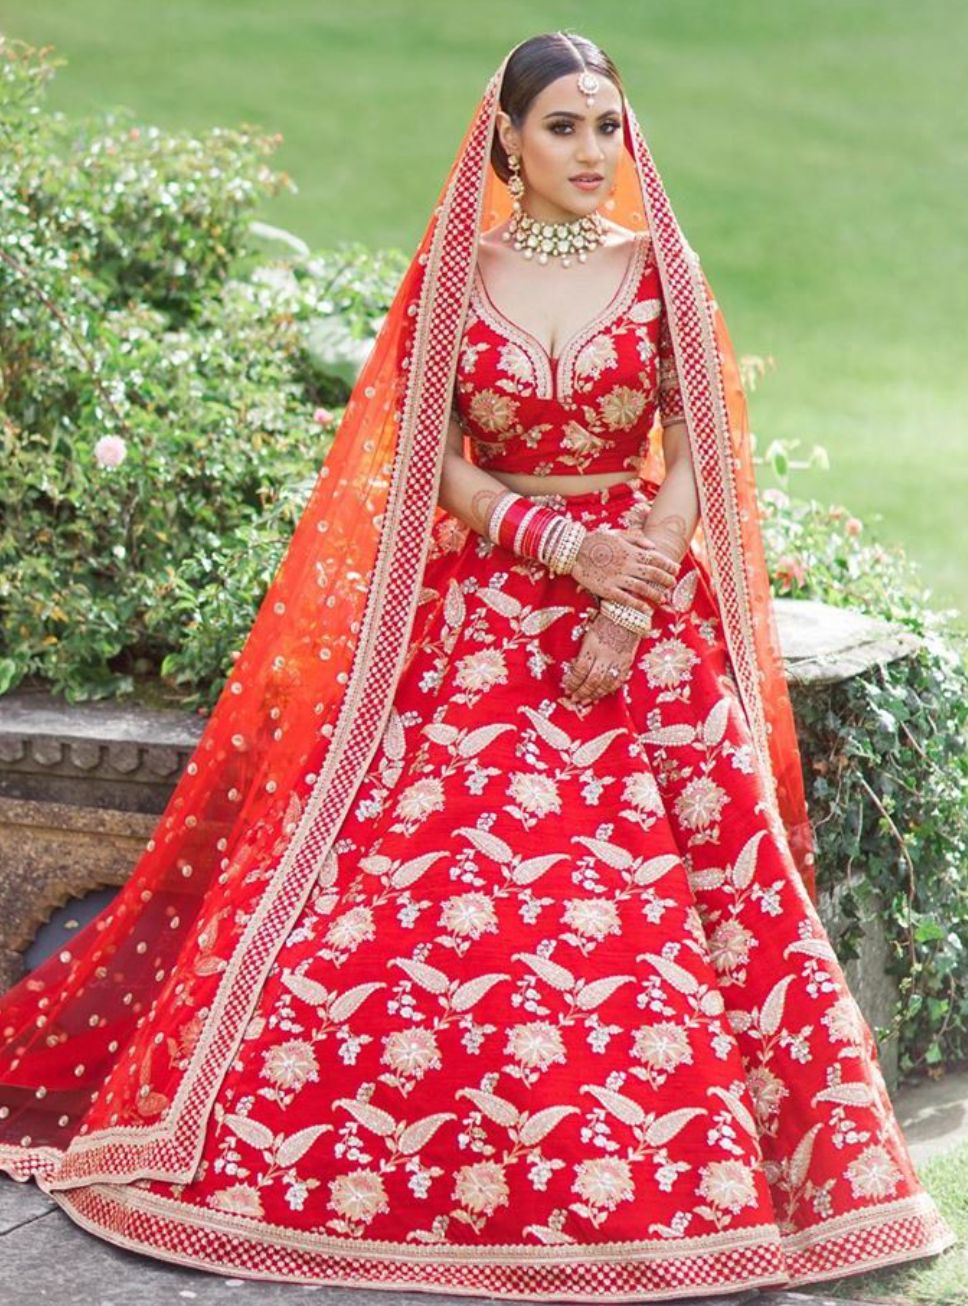 Flowers All The Way on Red Lehenga